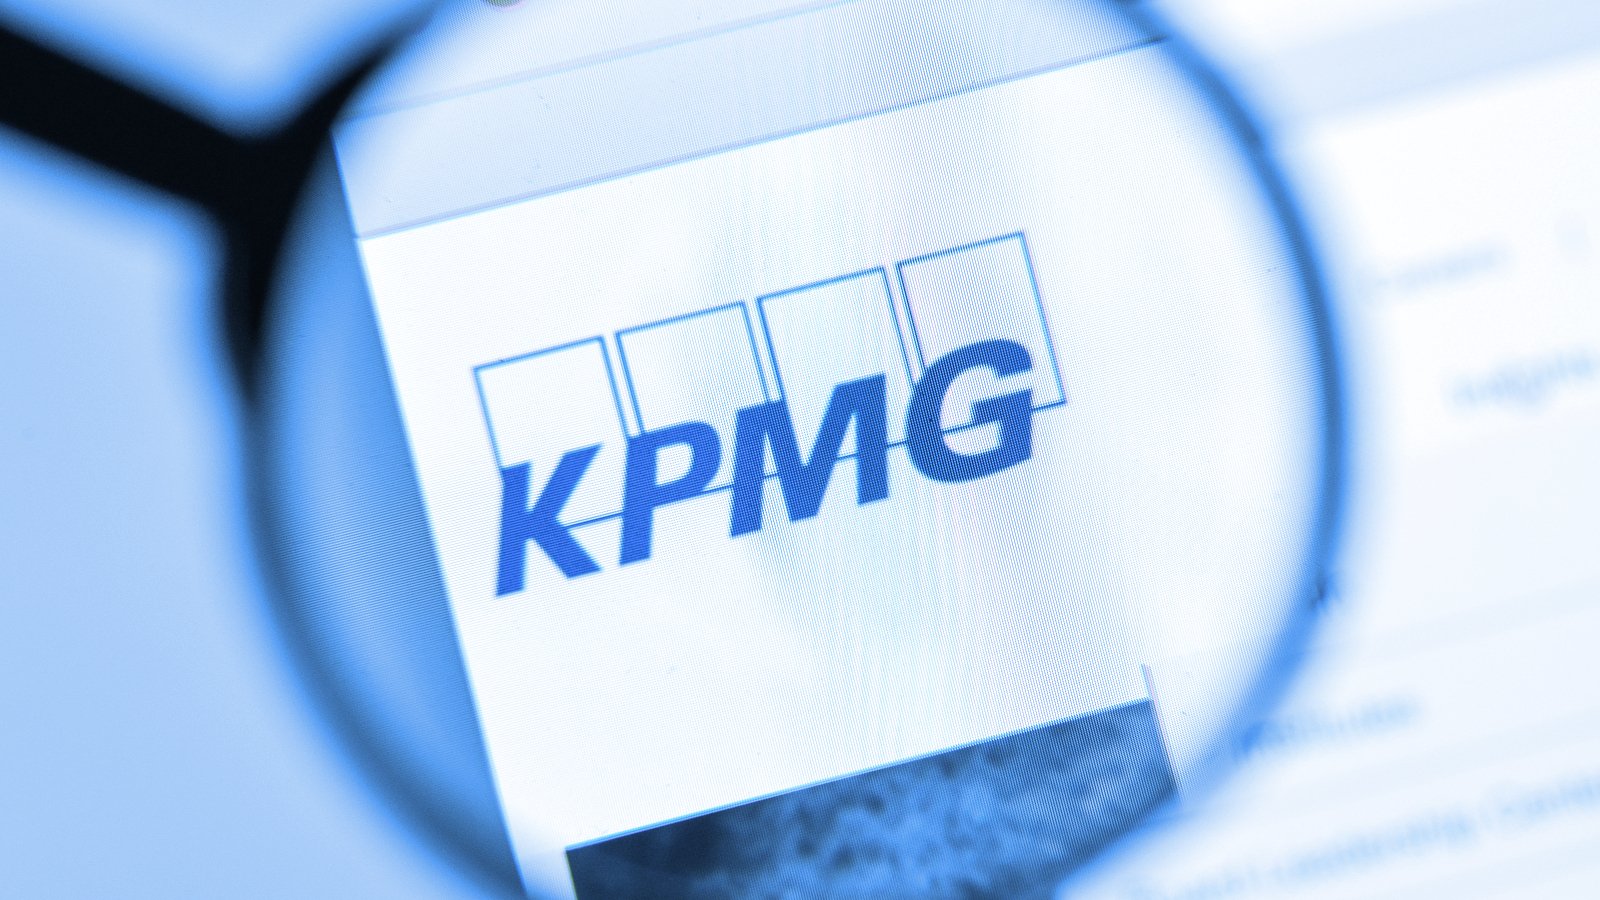 Crypto Investment to Slow in 2022 as Market Matures, Says KPMG